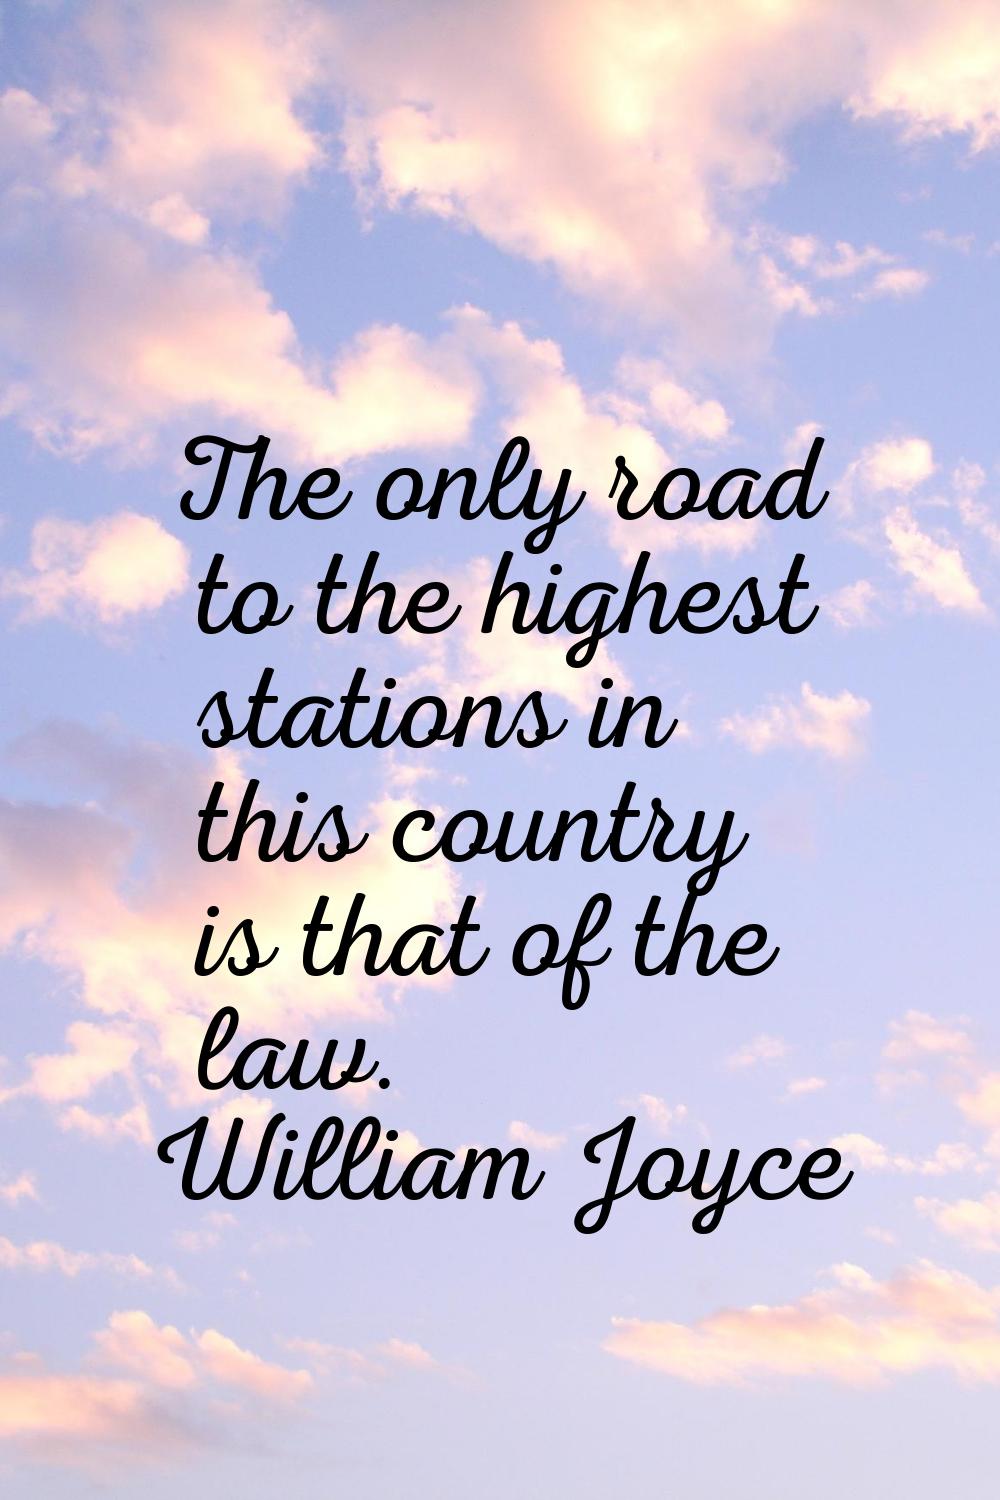 The only road to the highest stations in this country is that of the law.